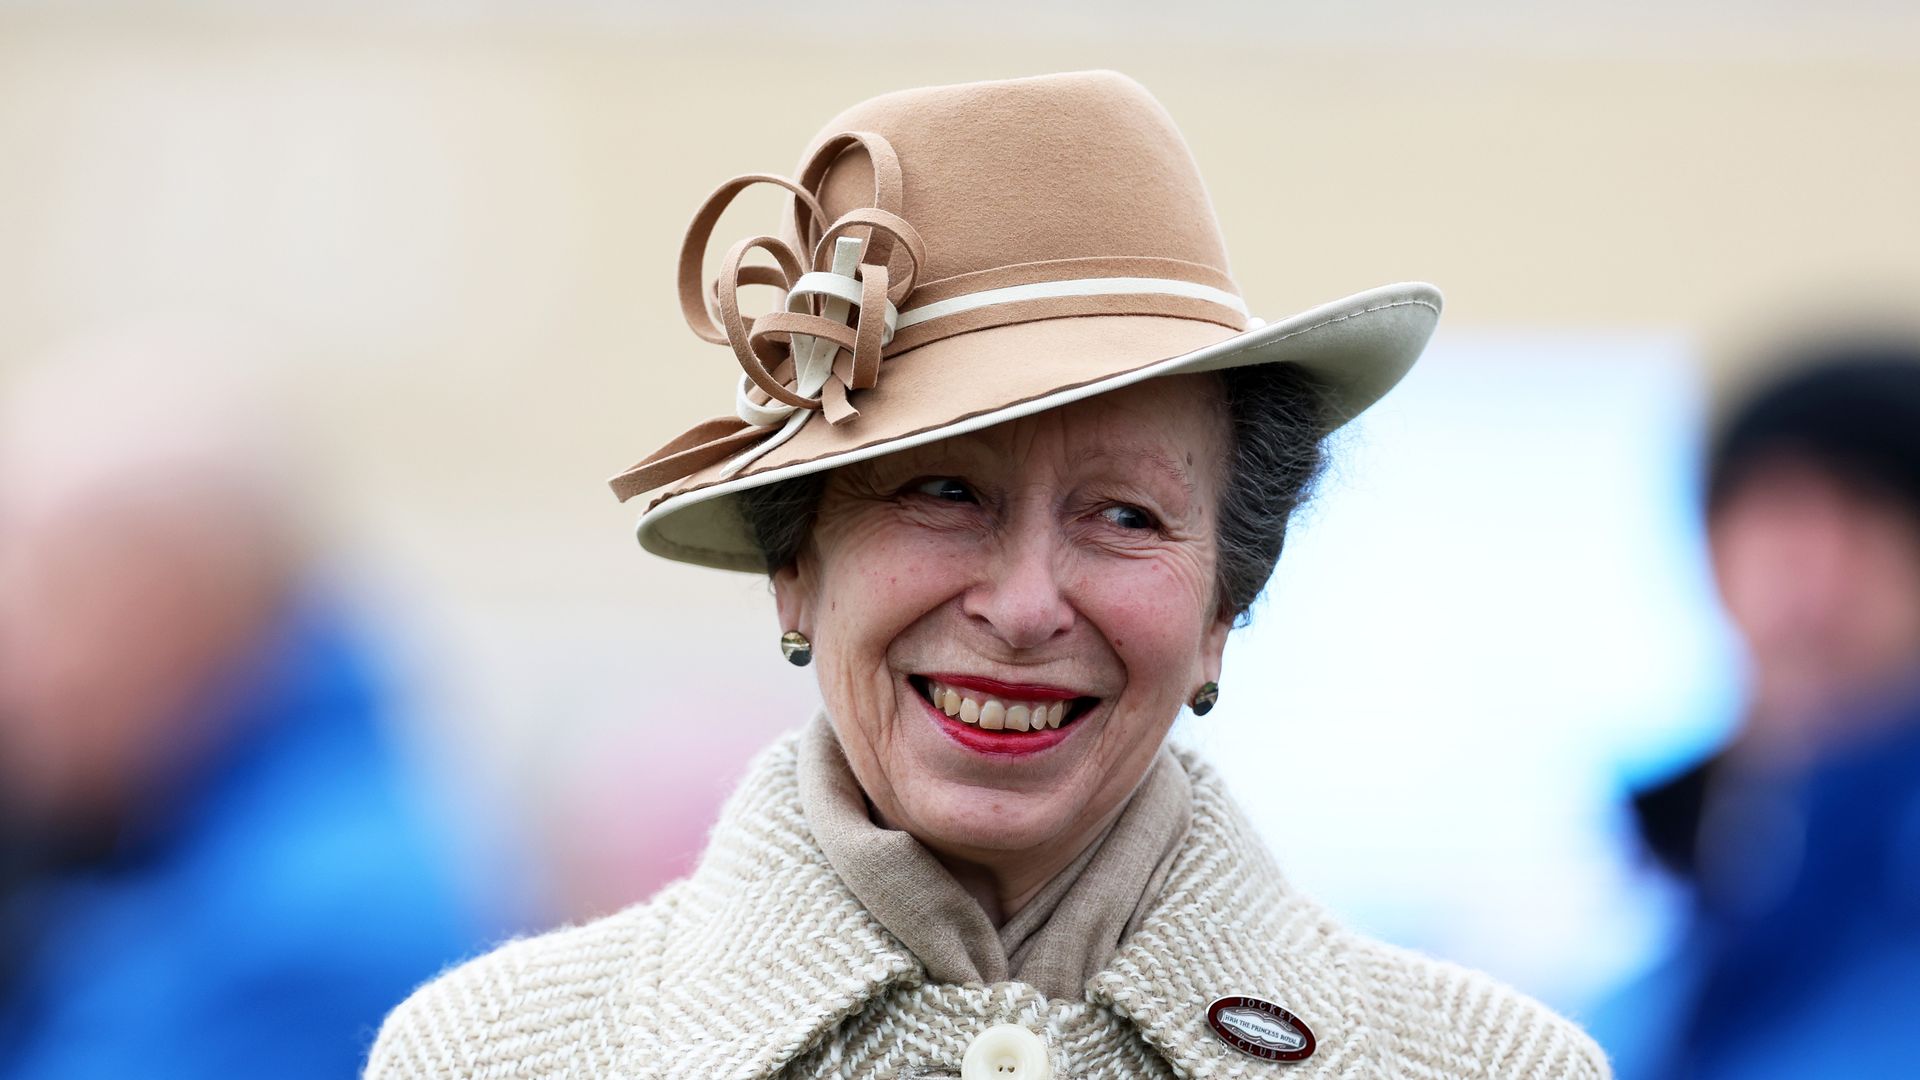 The Princess Royal smiling in neutral hat and coat